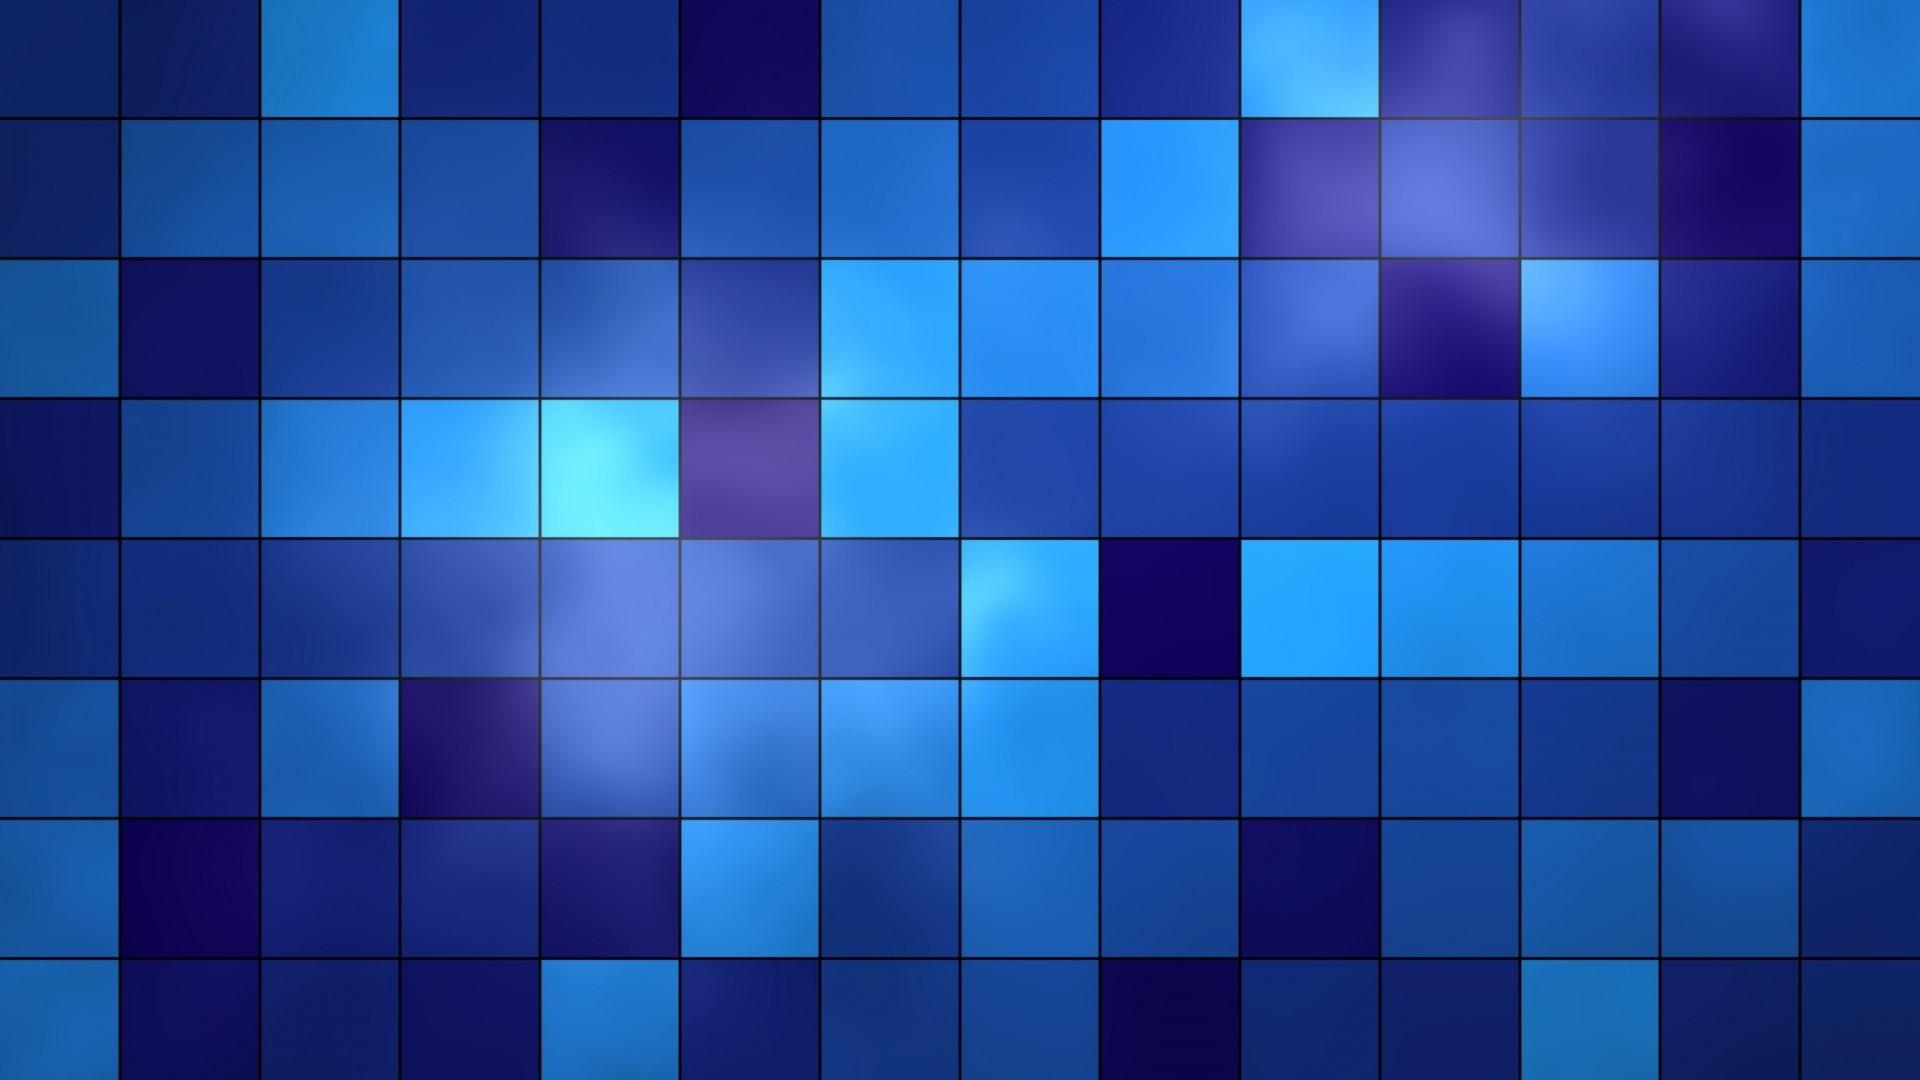 1920x1080 abstract square wallpaper and background JPG 149